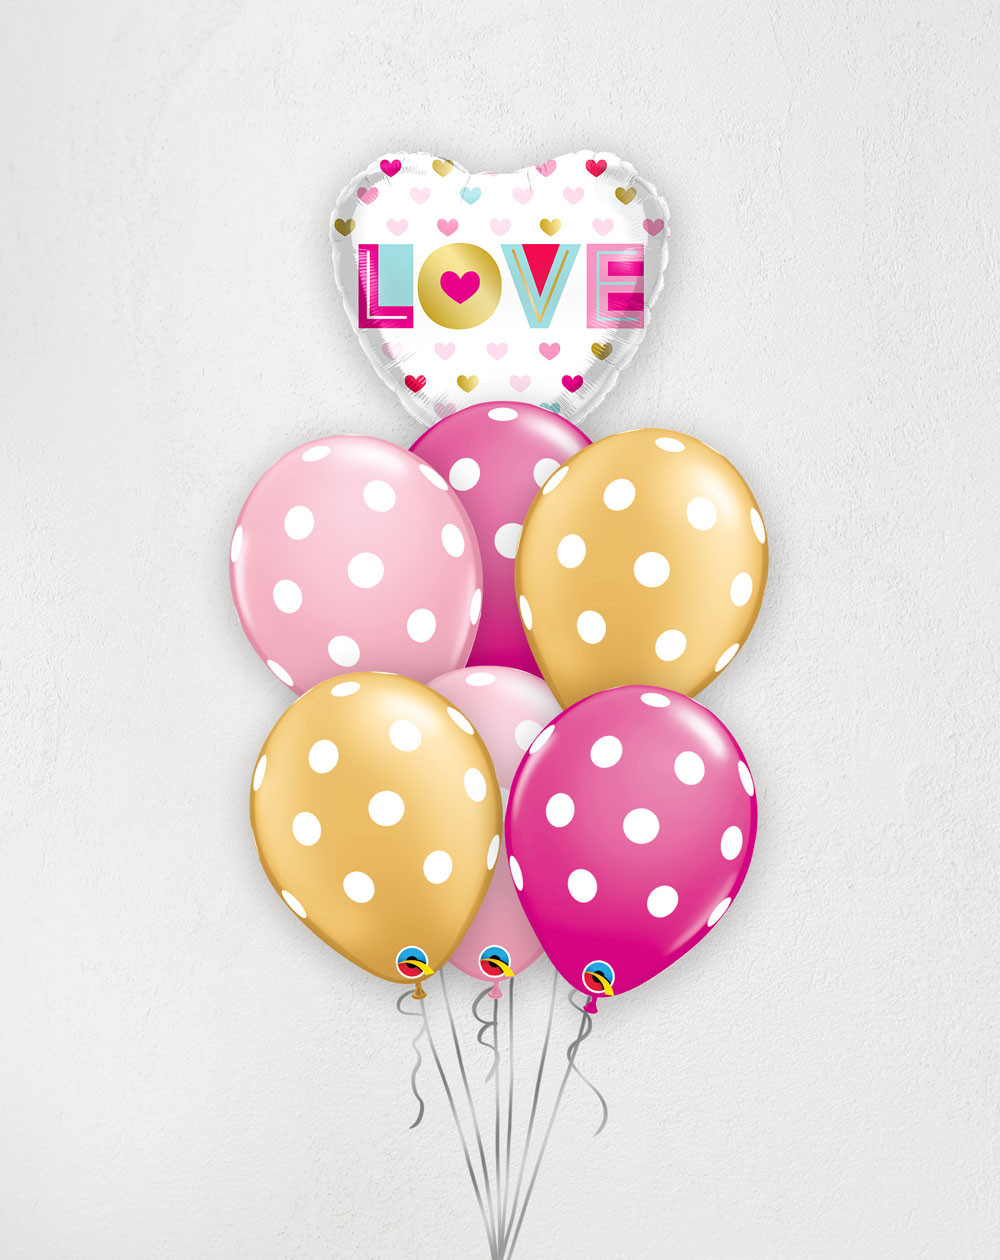 Big Balloon Bouquet Love with helium